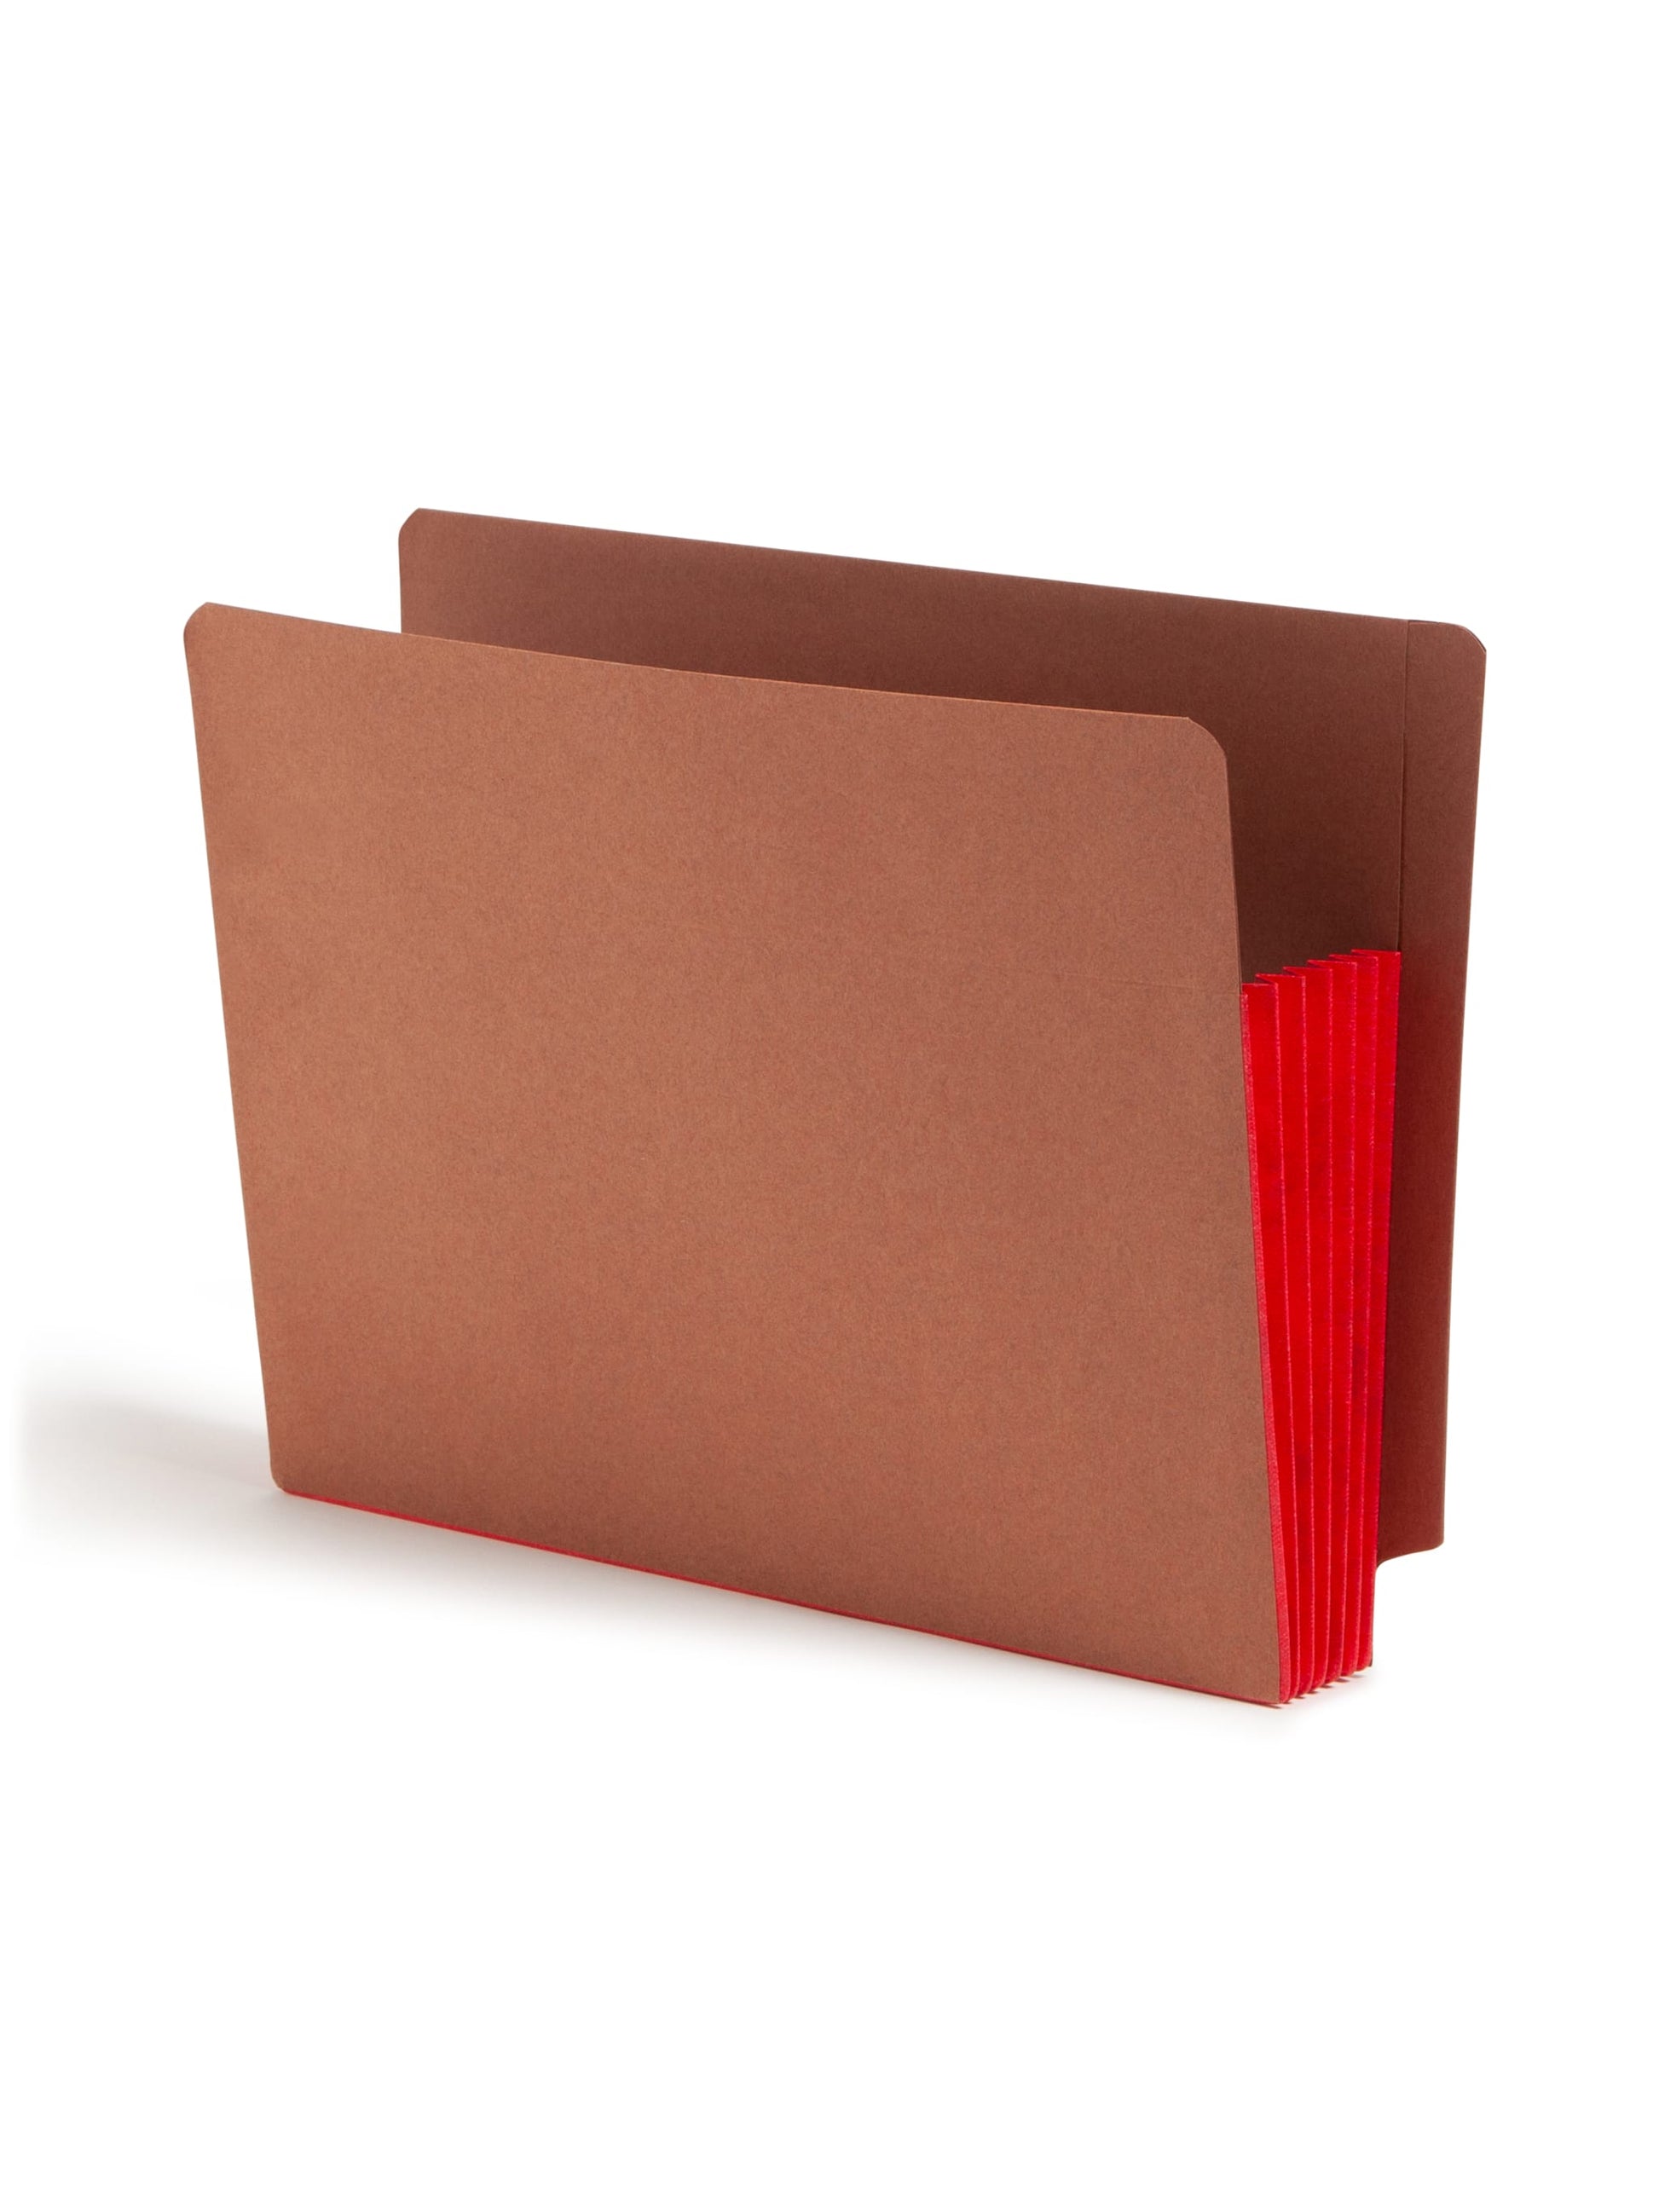 Reinforced End Tab File Pockets, Straight-Cut Tab, 5-1/4 inch Expansion, Red Color, Extra Wide Letter Size, Set of 0, 30086486736962